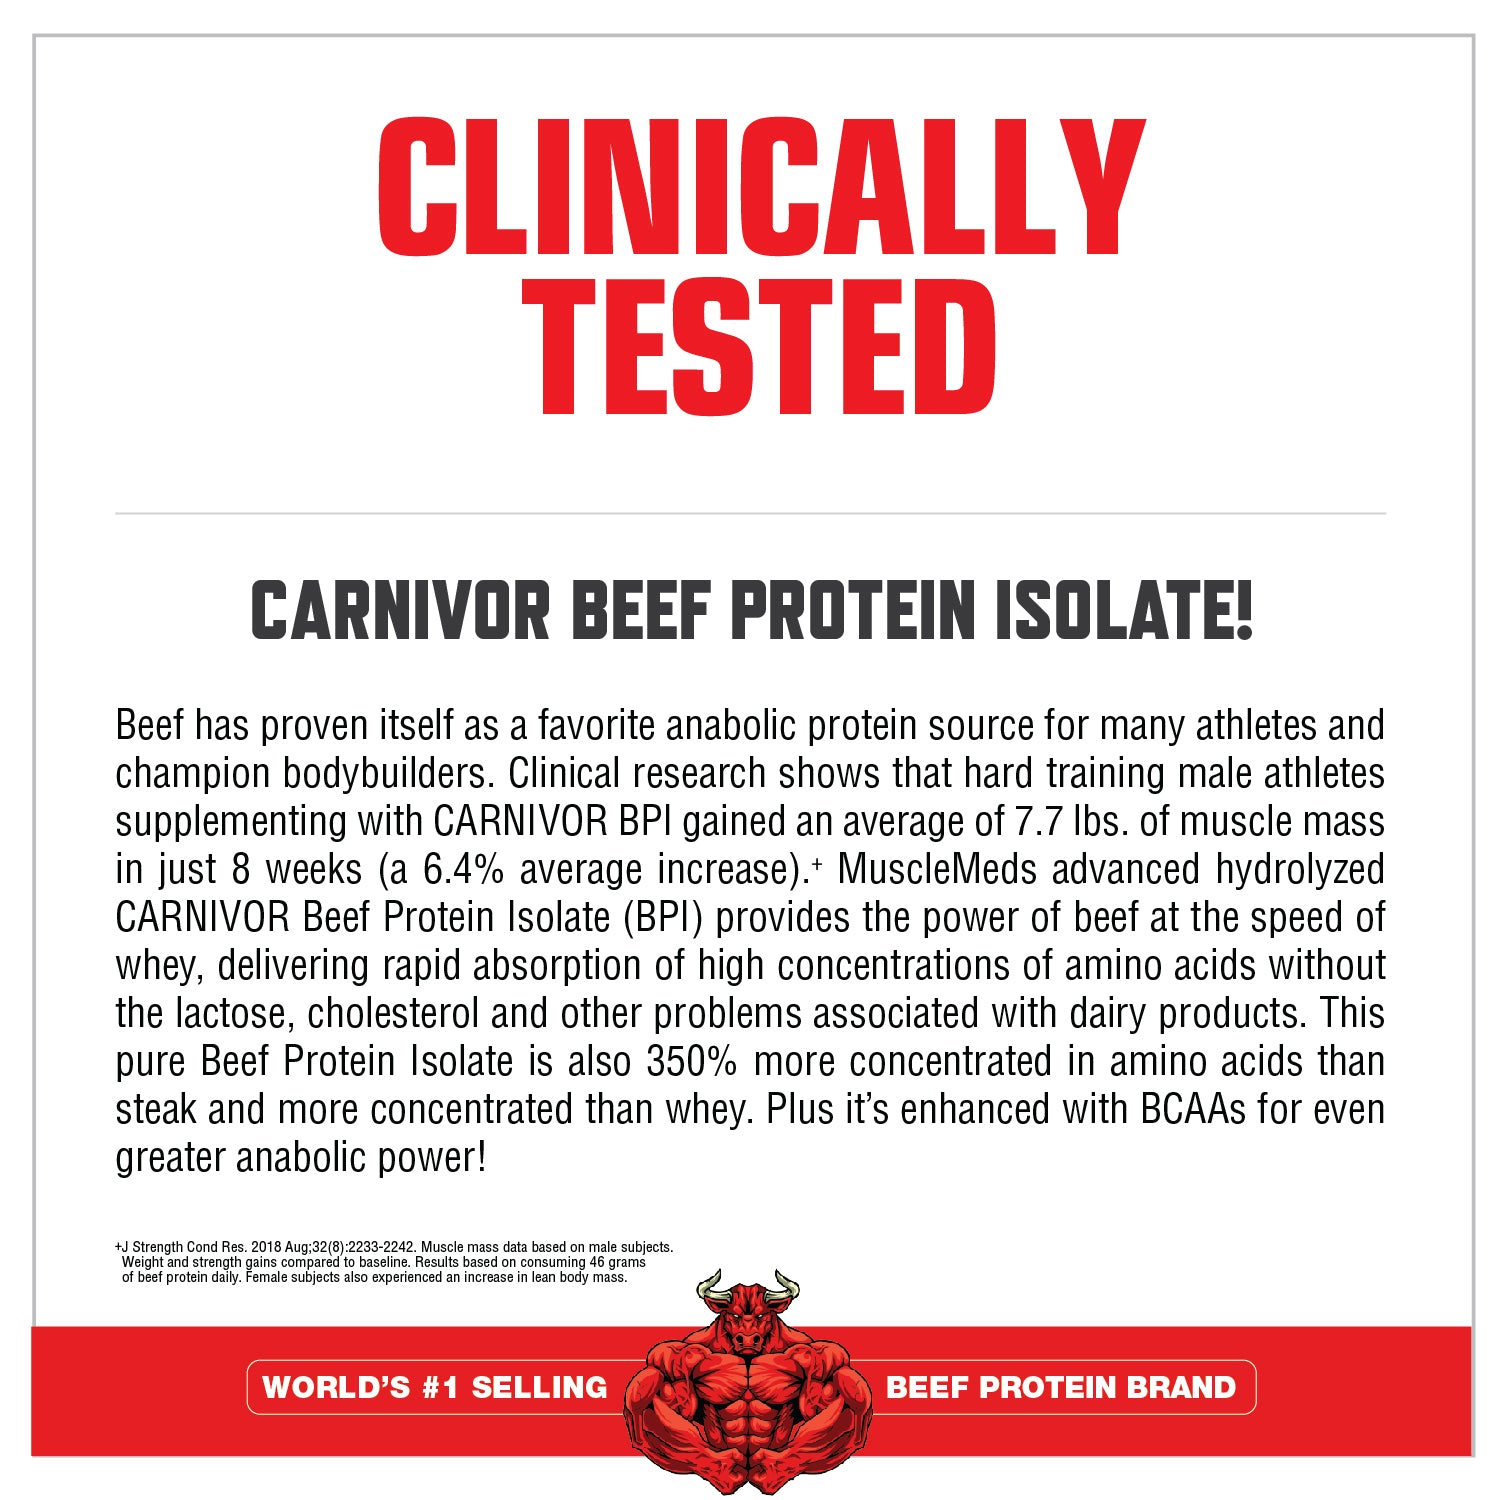 Carnivor RTD - 12 Pack / 40g of Beef Protein Isolate / Protein Shake